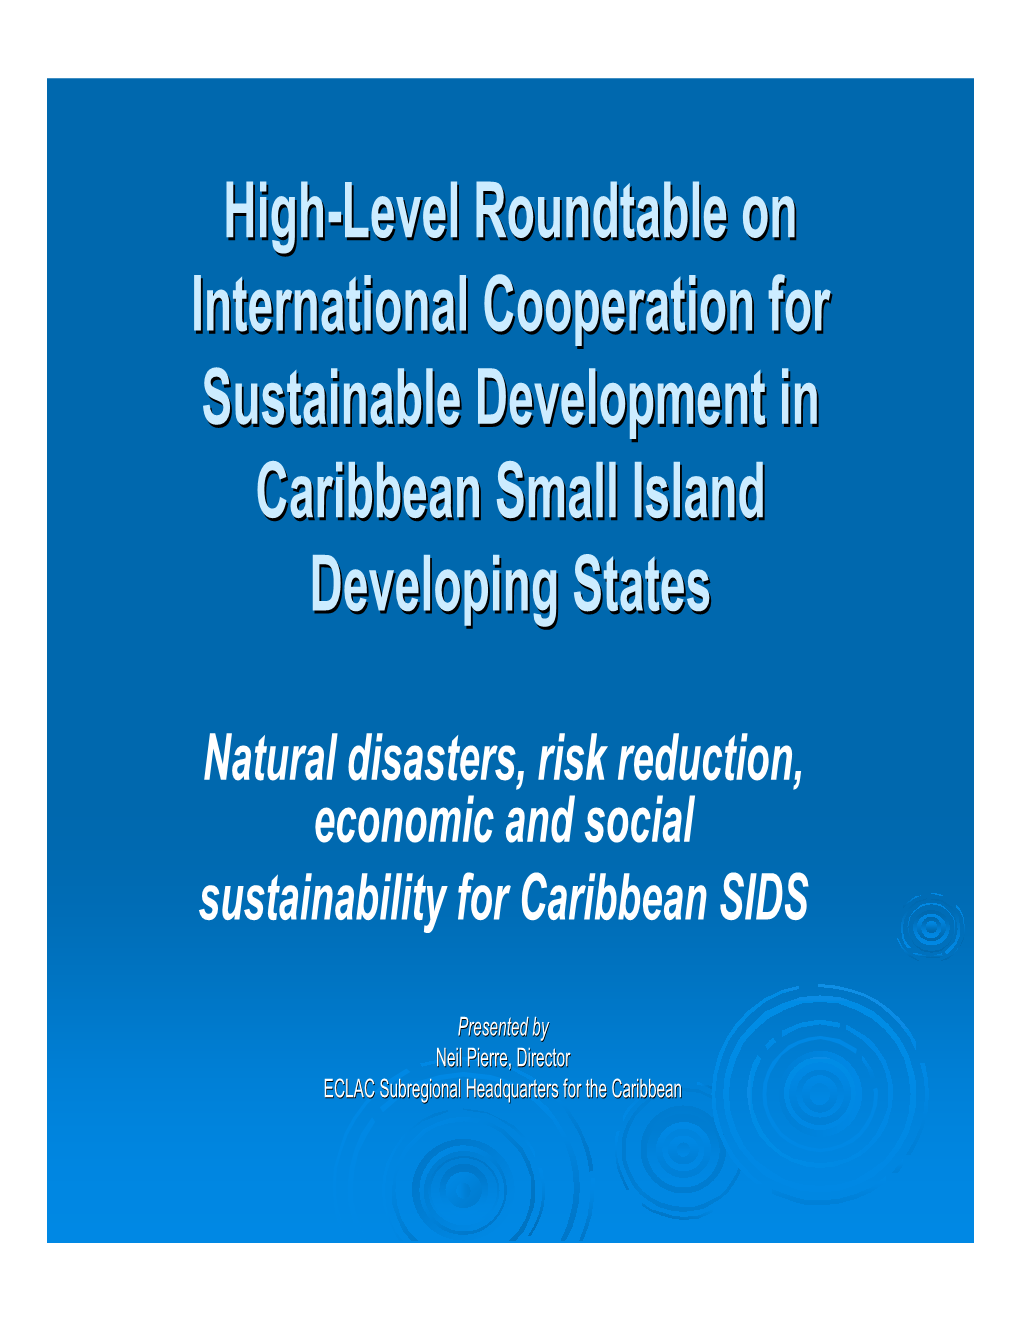 Neil Pierre, Director ECLAC Subregional Headquarters for the Caribbean Disastersdisasters Inin Thethe Caribbeancaribbean 20002000 --20072007